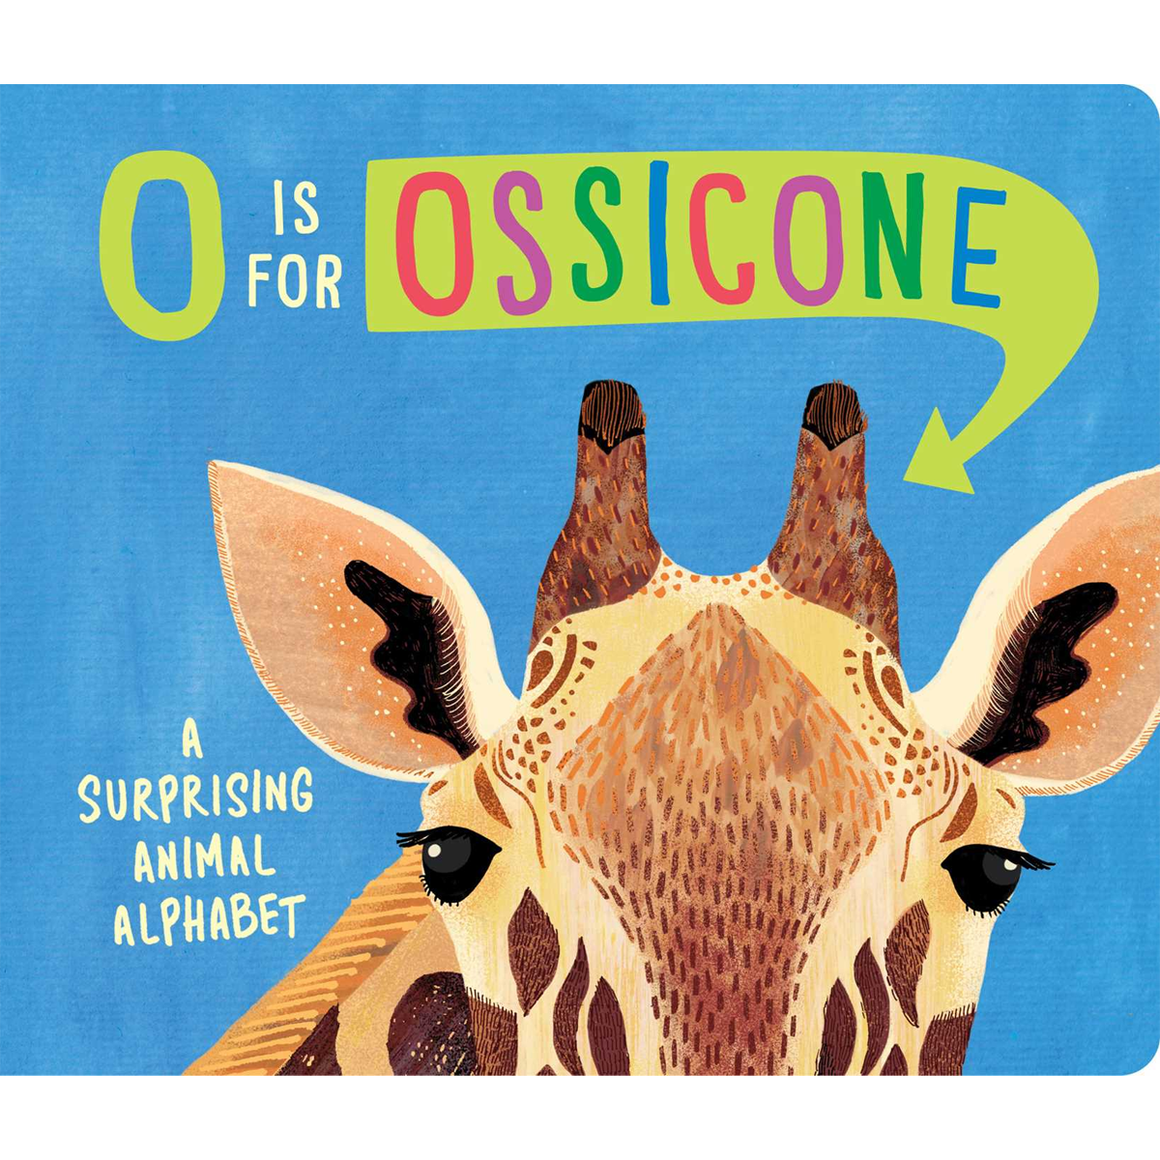 O Is for Ossicone | Author: Hannah Eliot